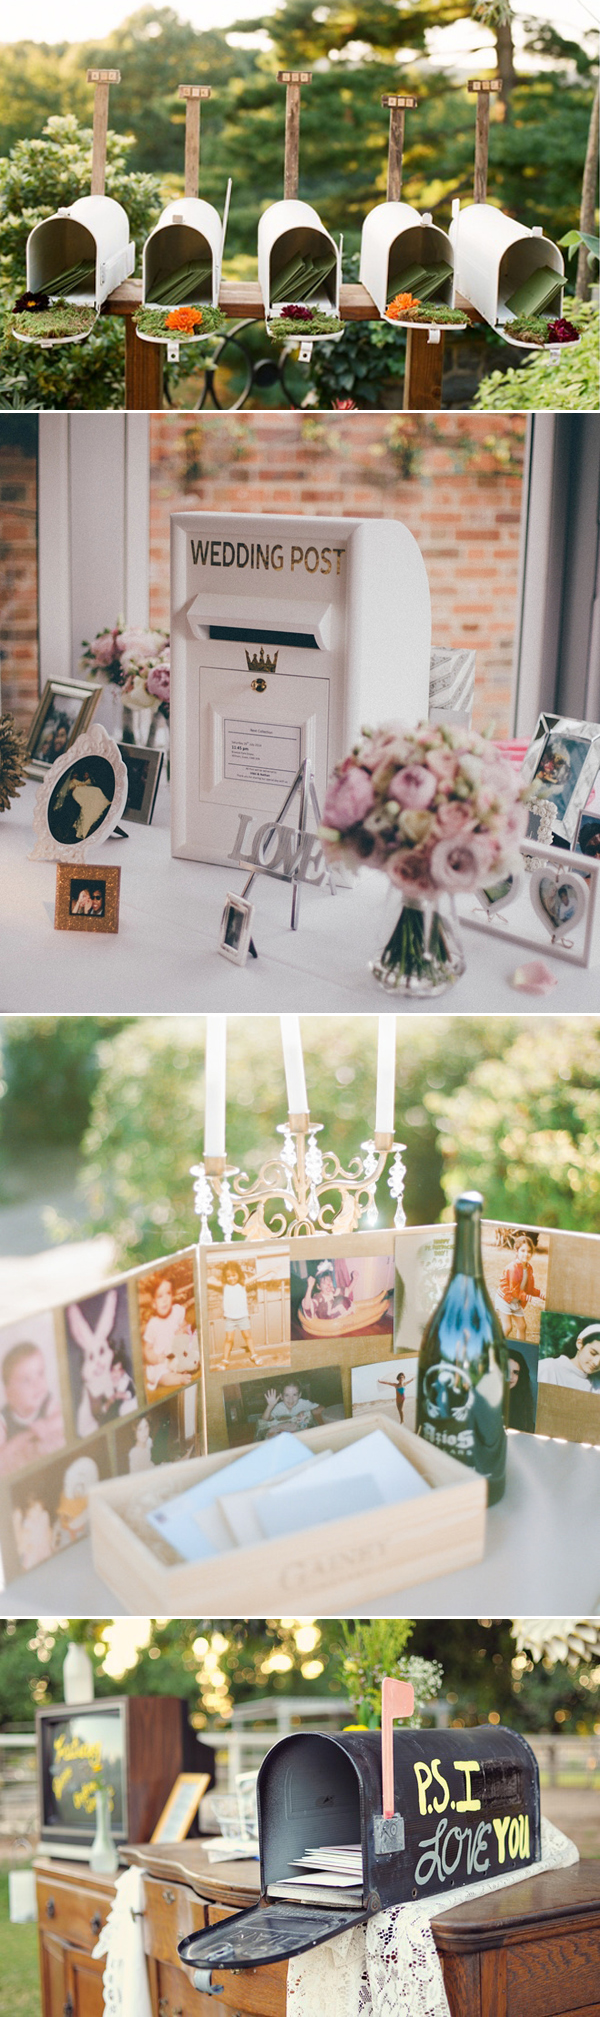 mail guest book table setting ideas for wedding